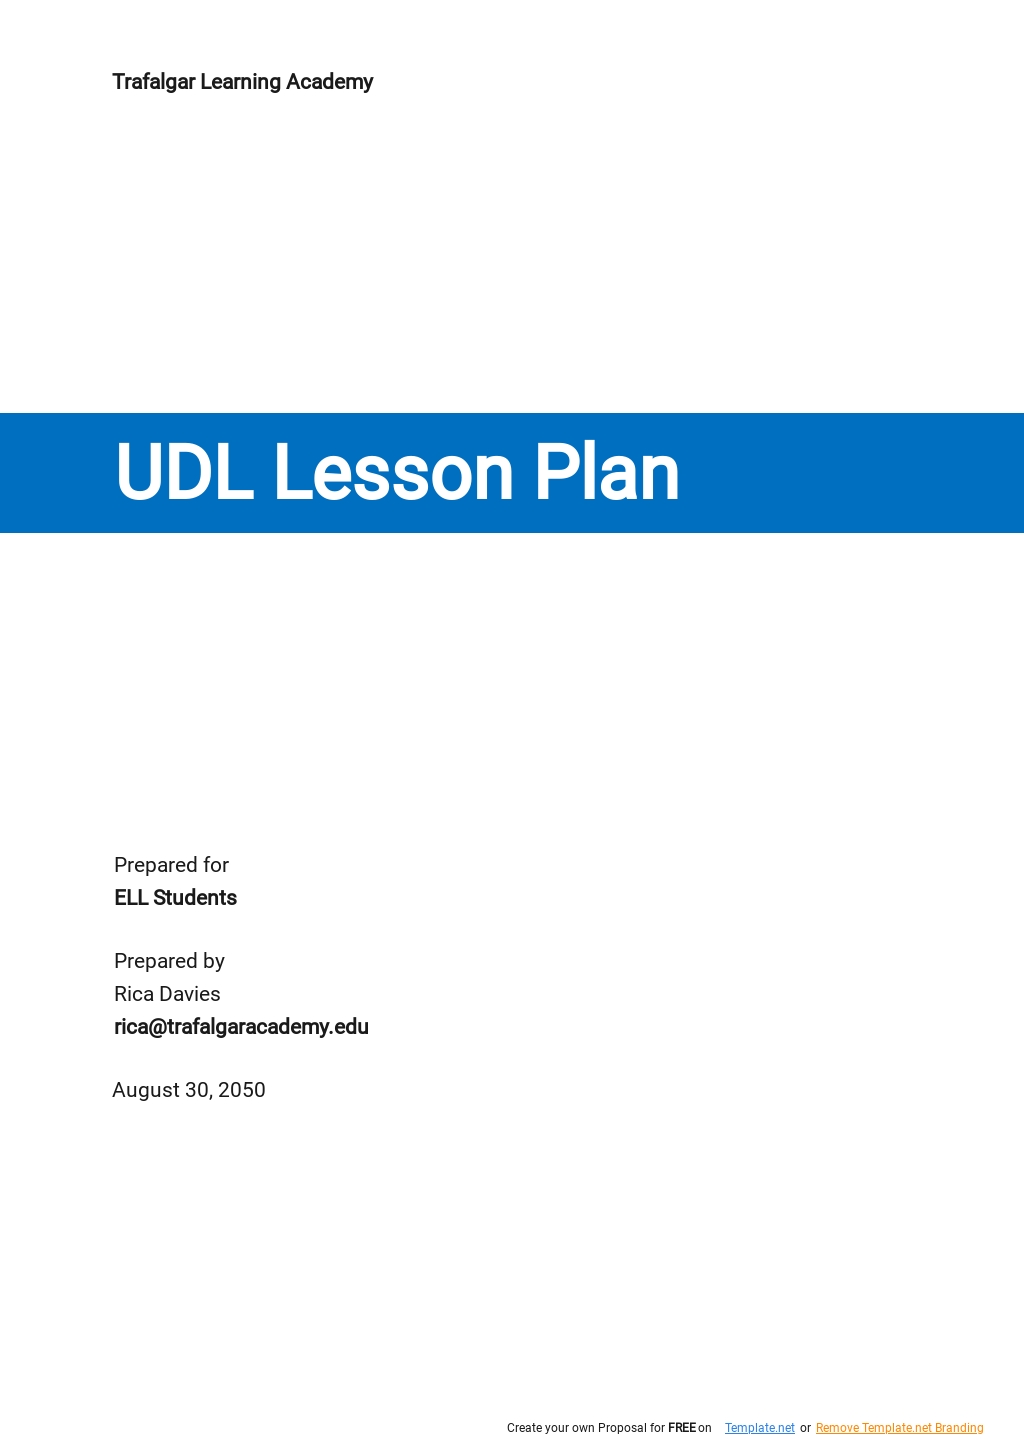 UDL Lesson Plan for ELL Students Template.jpe